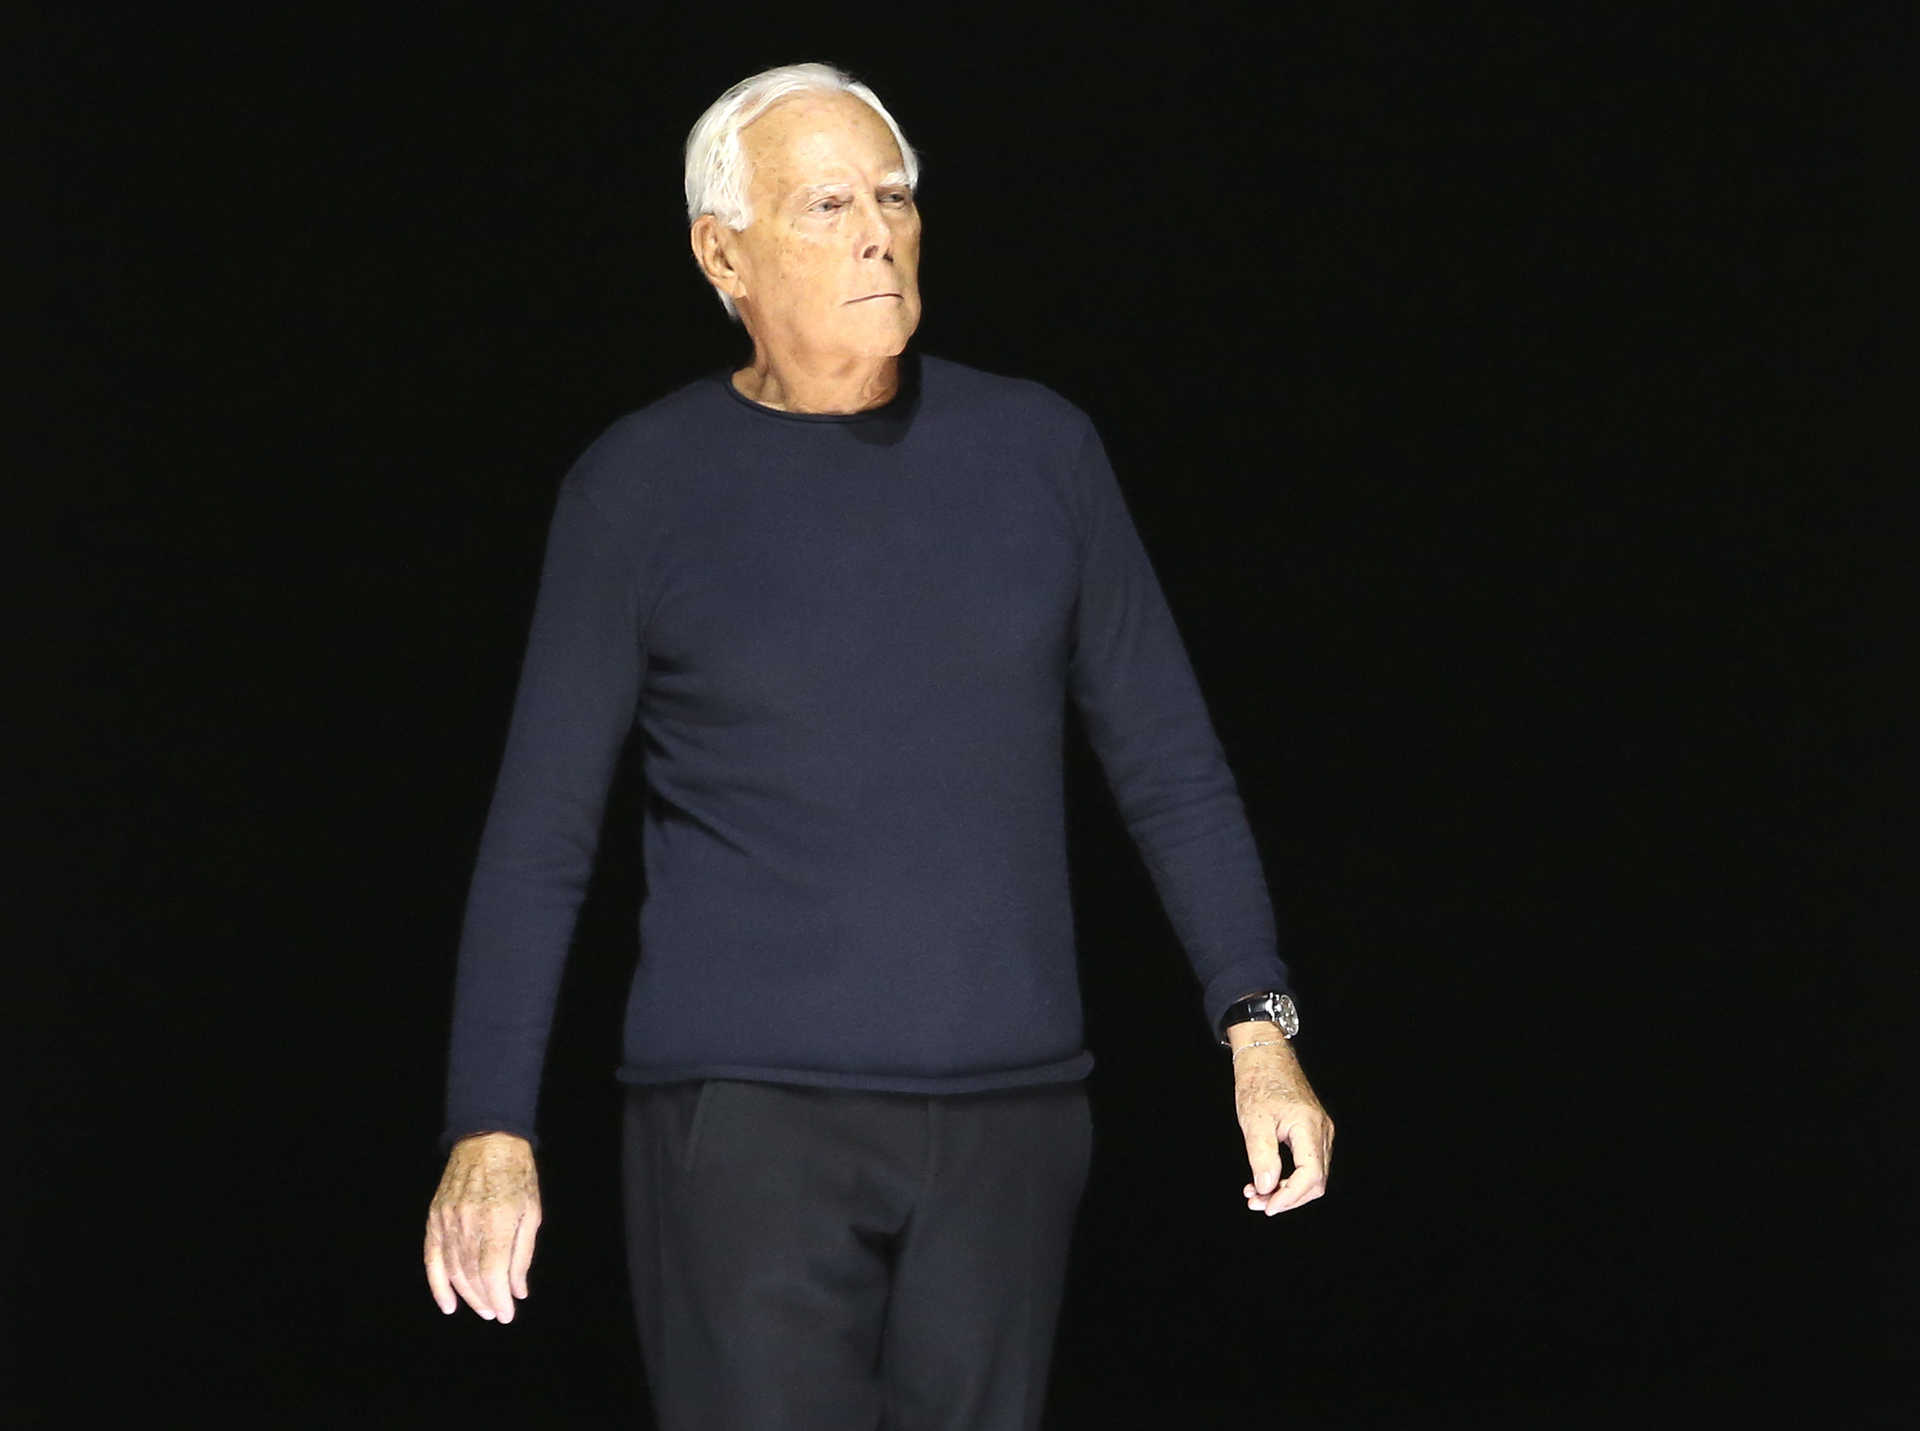 Italian designer Giorgio Armani acknowledges the applause at the end of his Autumn/Winter 2016 women's collection during Milan Fashion Week